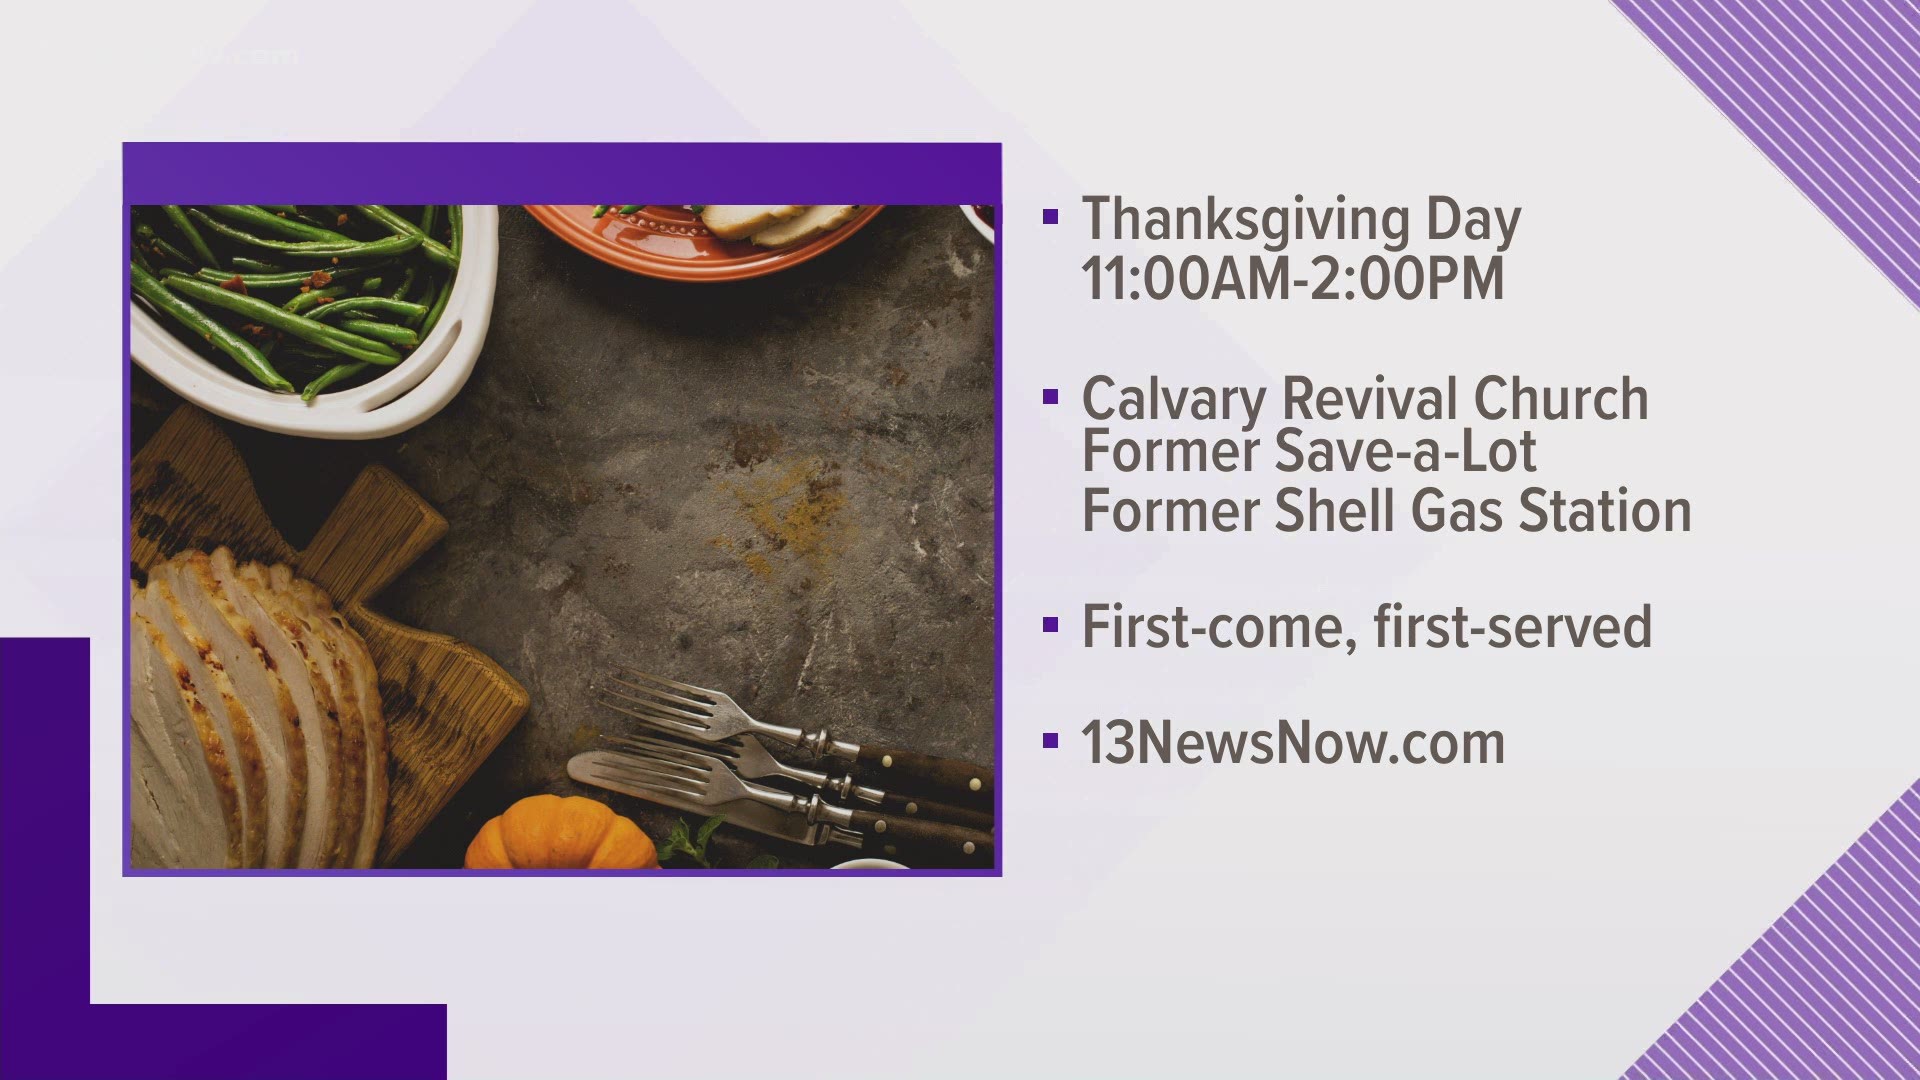 Calvary Revival Church in Norfolk is doing what it's done for the past 30 years: that's providing meals to people.